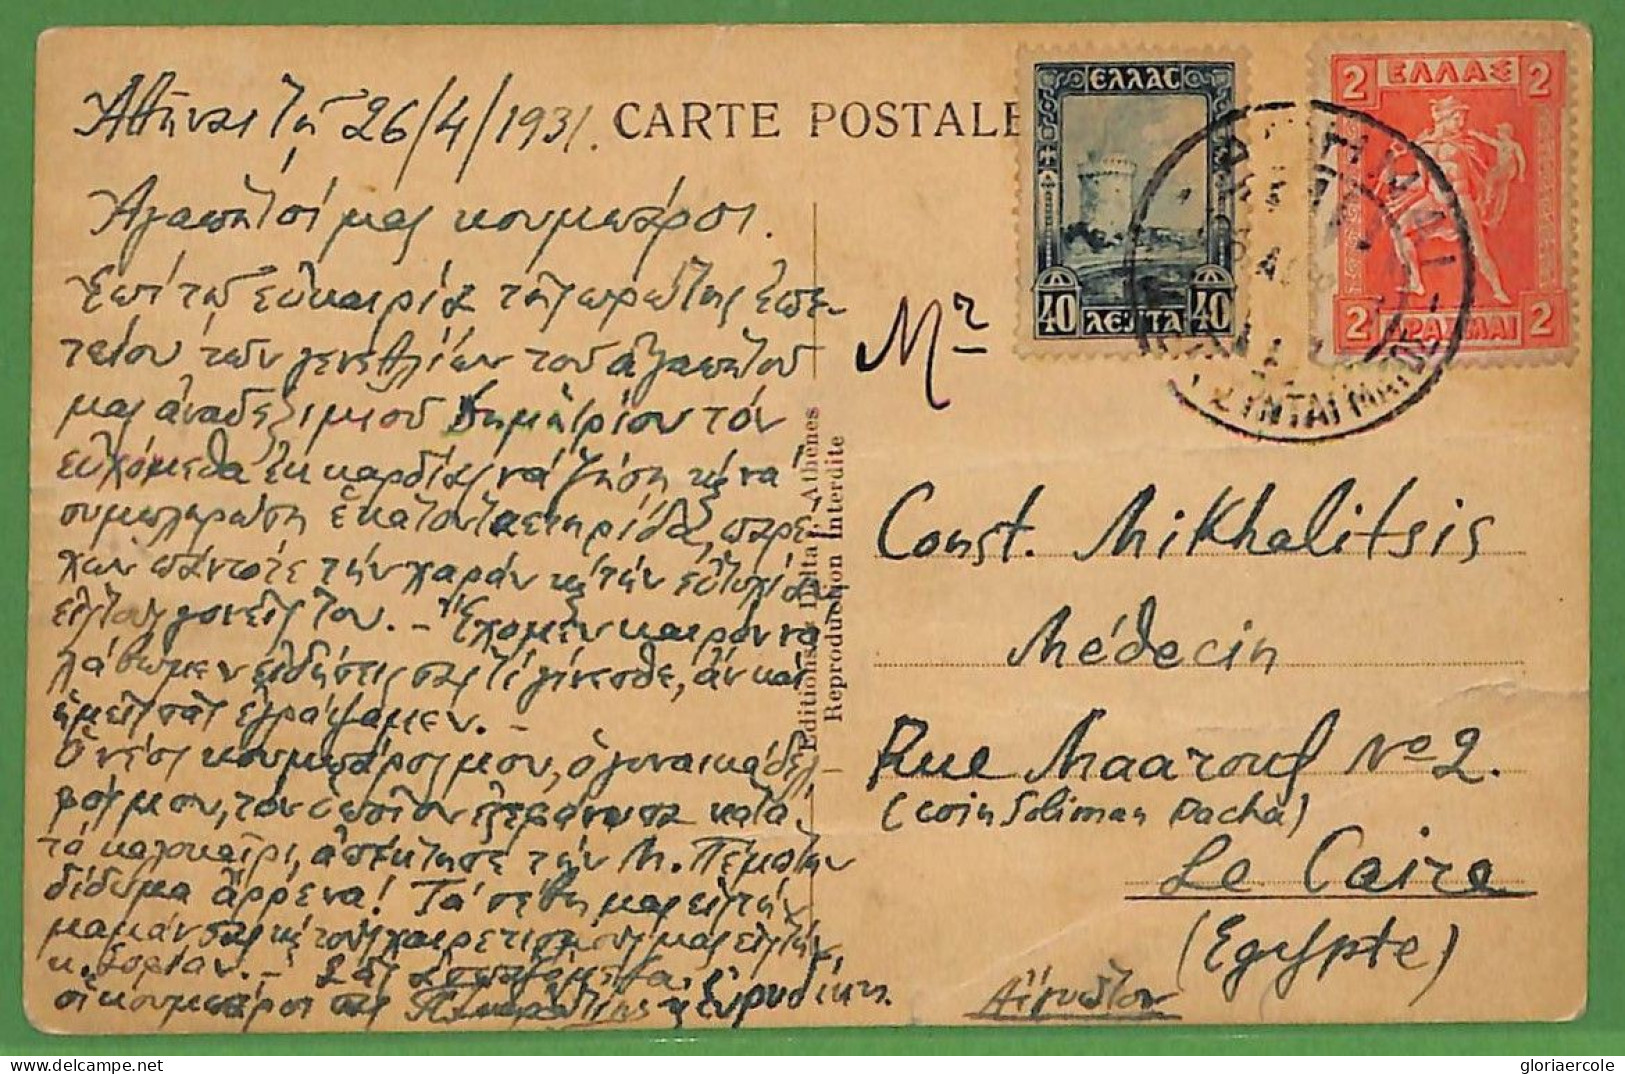 Ad0909 - GREECE - Postal History -  POSTCARD To CAIRO Egypt  1931 - Lettres & Documents